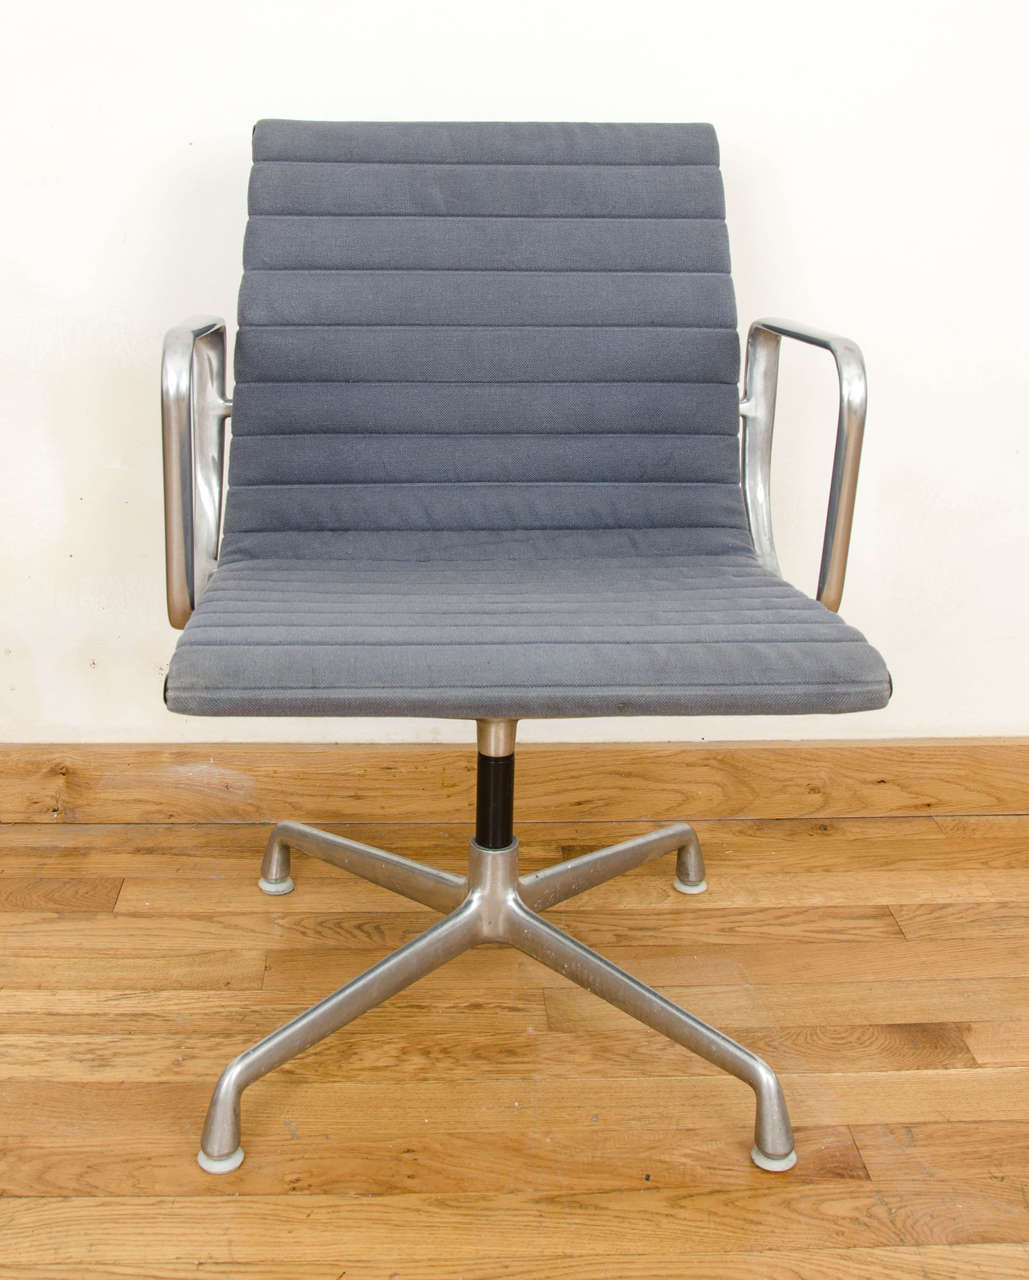 Set of eight  Eames aluminium group management chairs
Marked Herman Miller 938-138
Pale grey fabric upholstery
excellent condition
small hole in the fabric on one seat